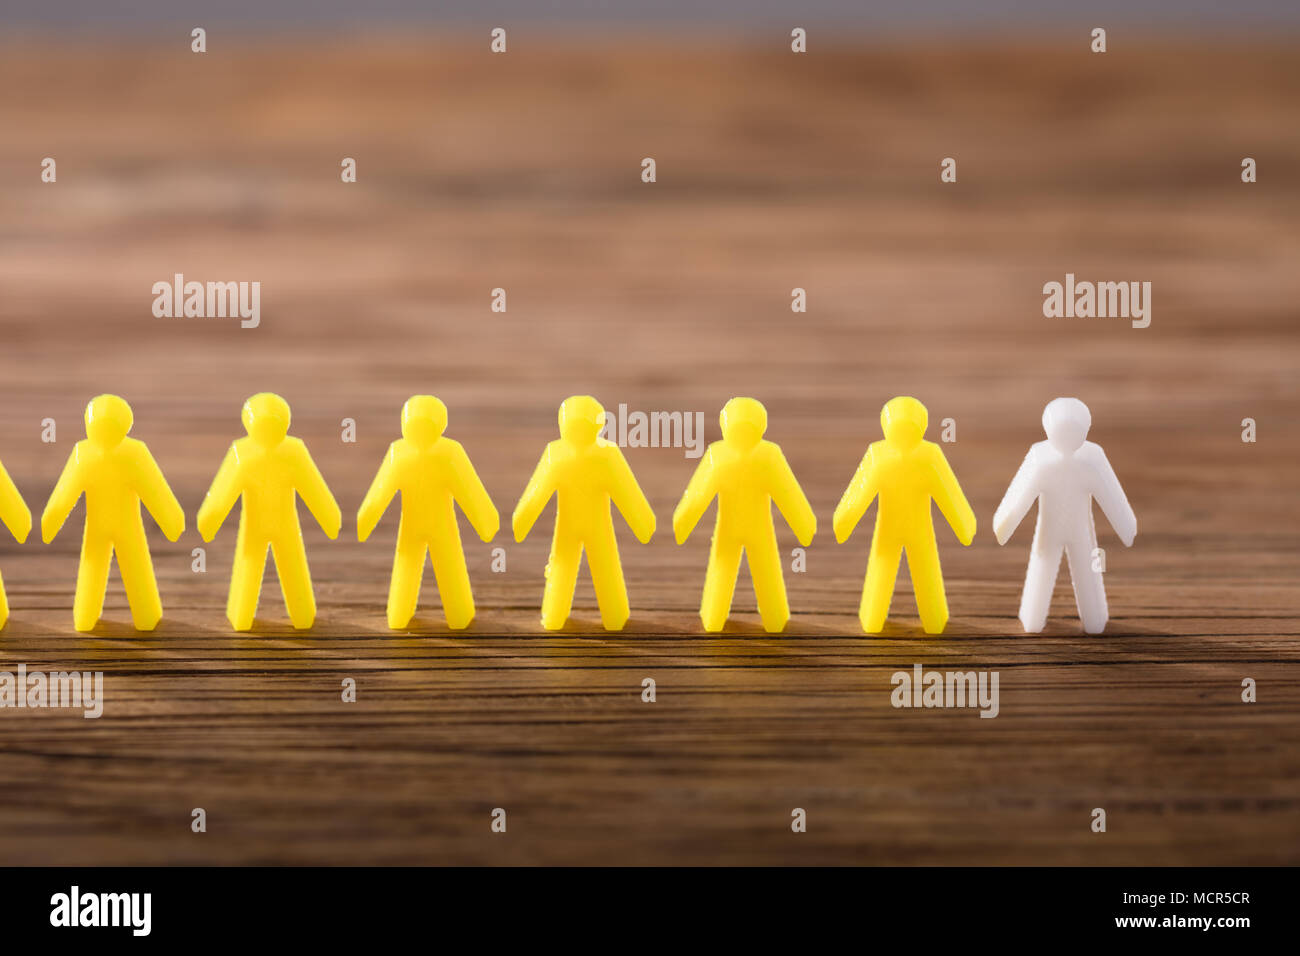 White Figure Standing Among Yellow Human Figures In A Row On Wooden Background Stock Photo